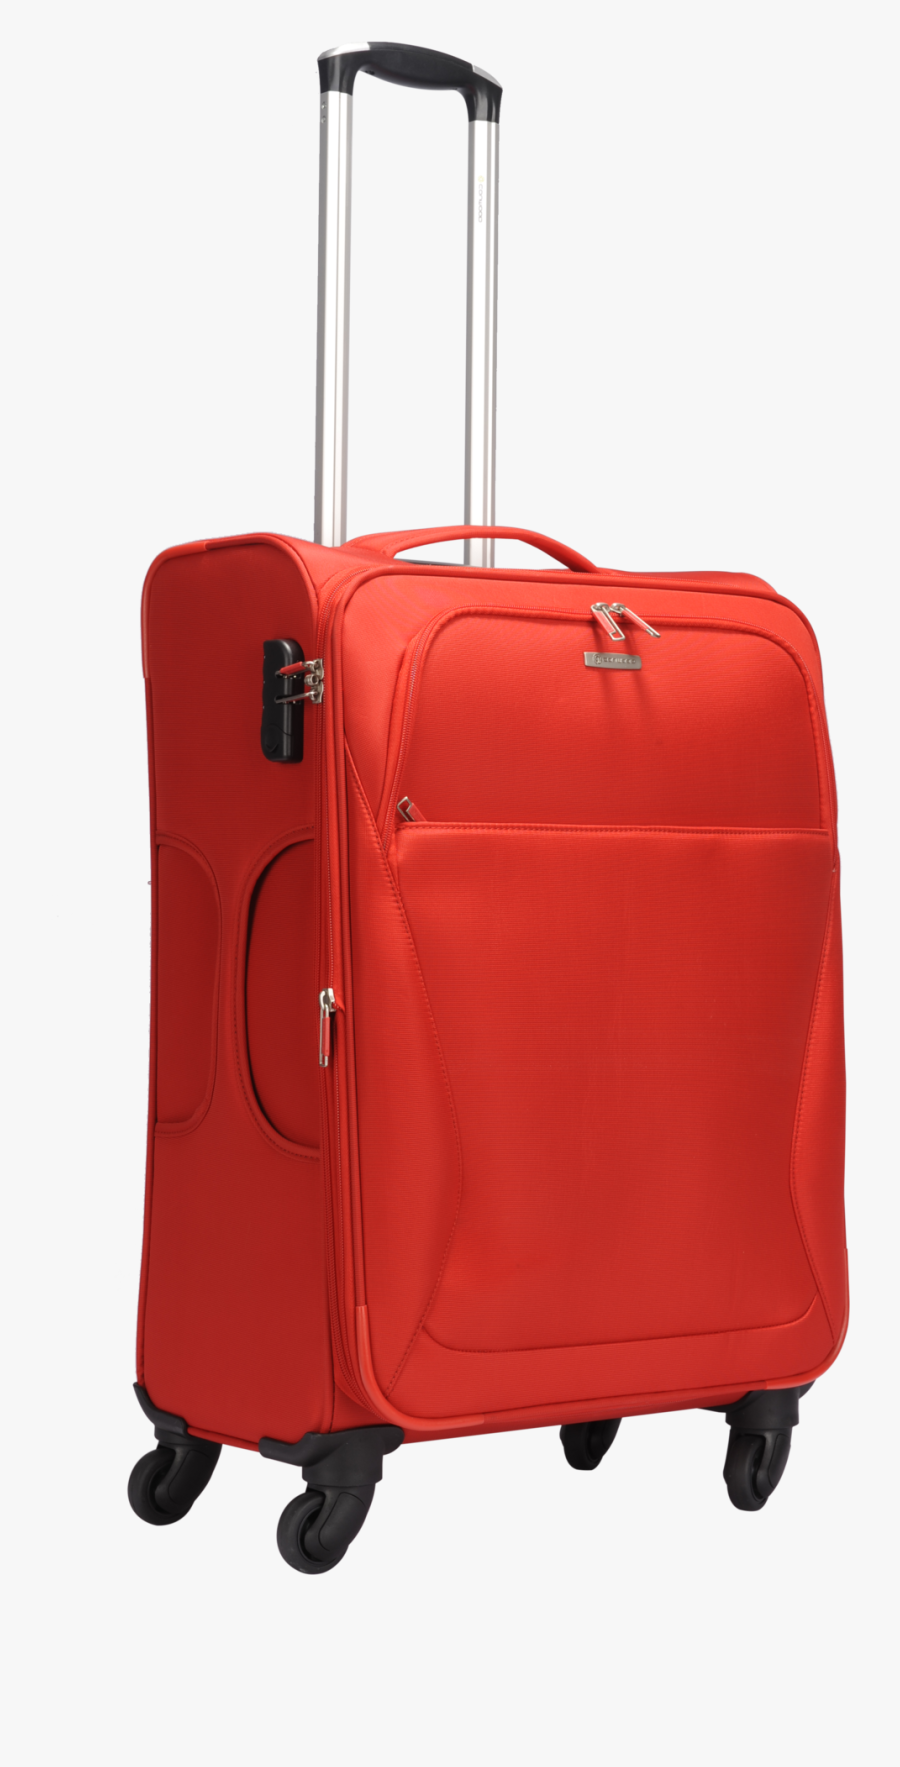 Transparent Red Luggage Png, Transparent Clipart